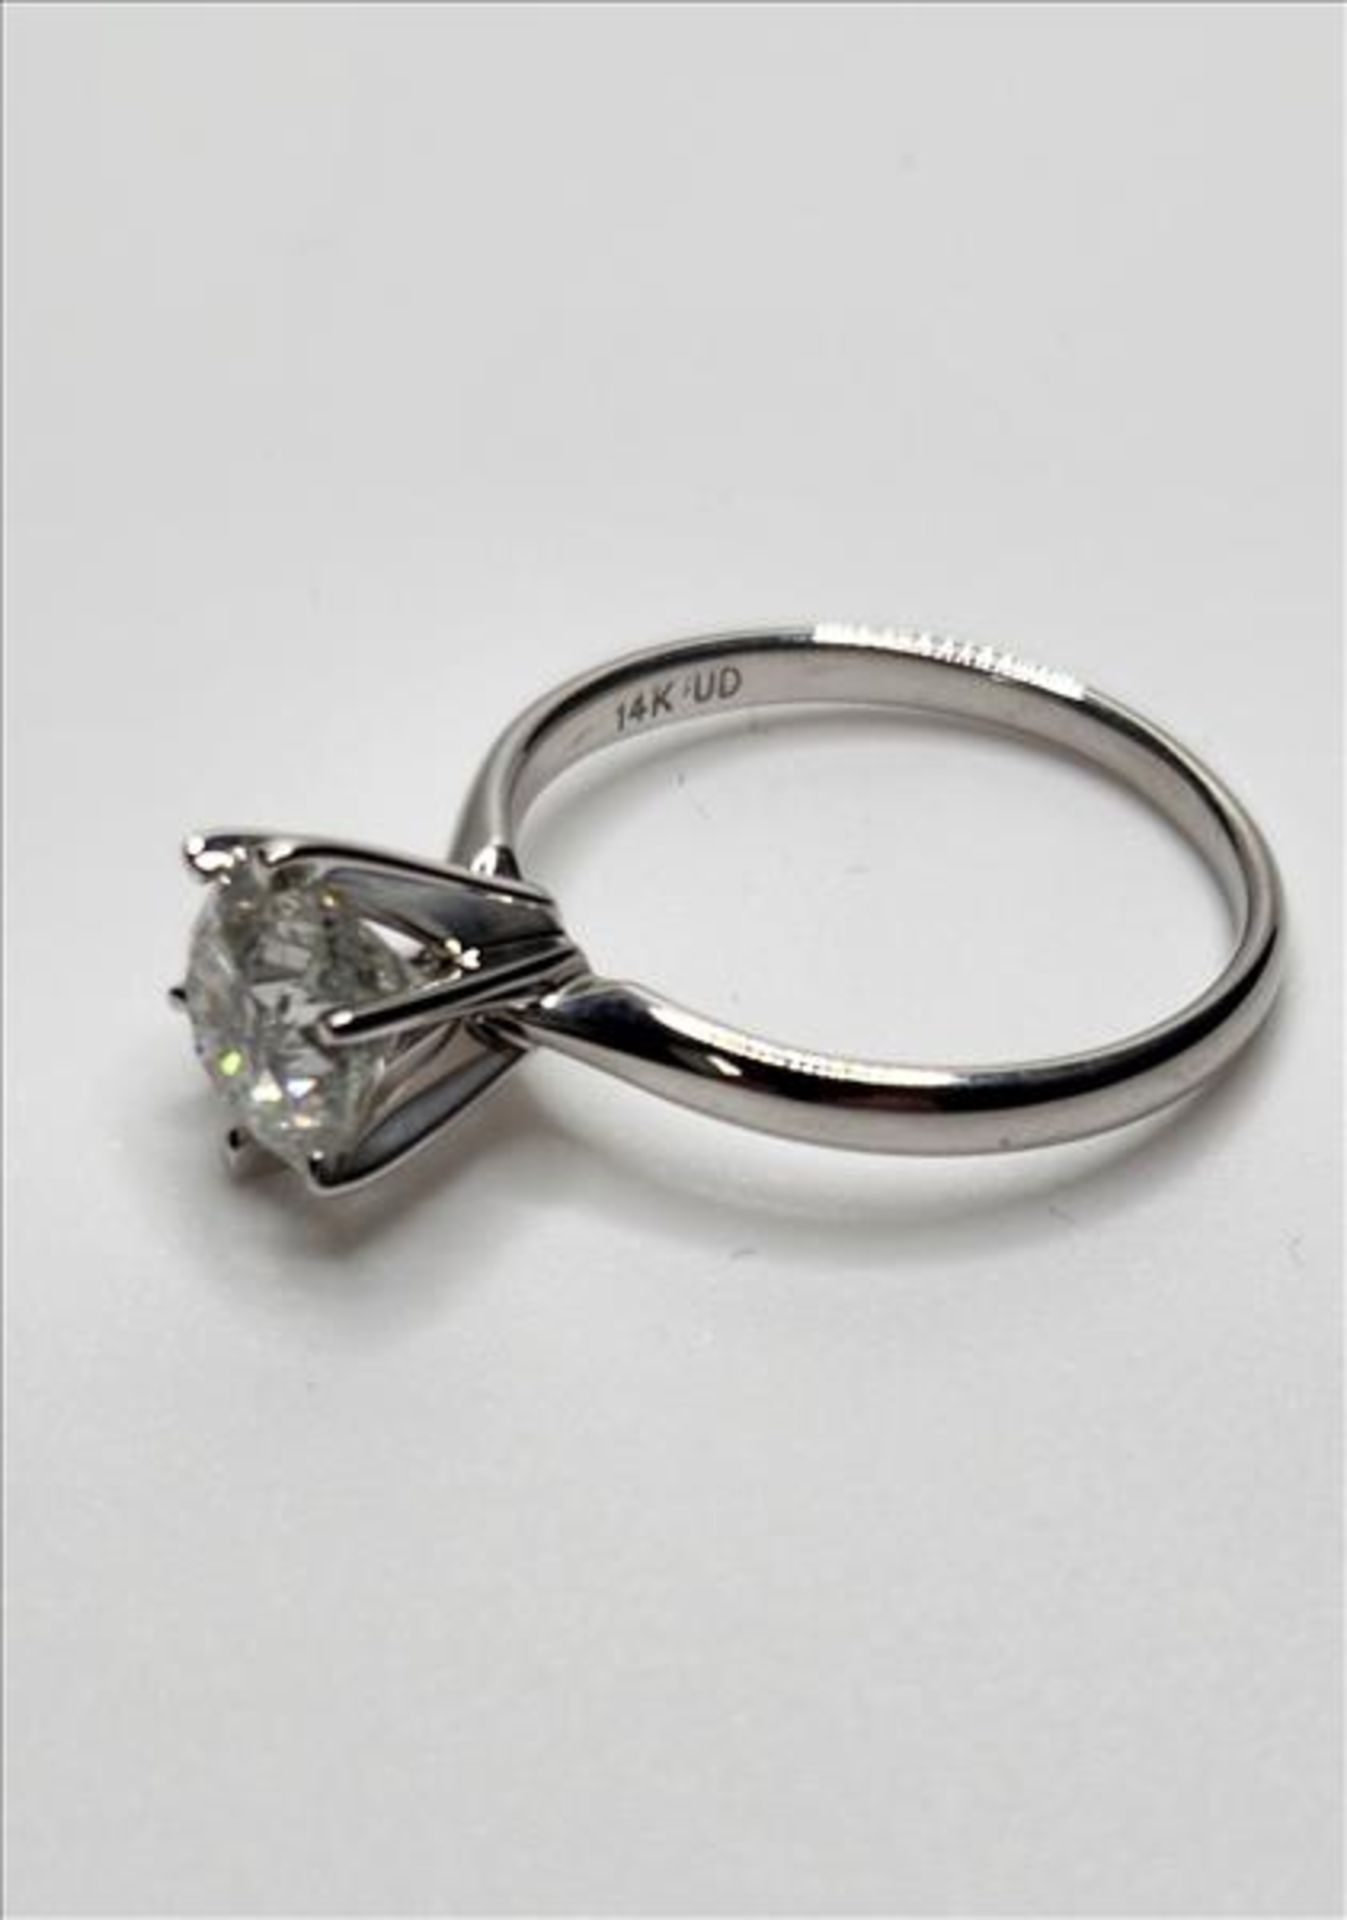 One lady’s stamped and tested 14kt white gold diamond solitaire engagement ring trademarked by Charm